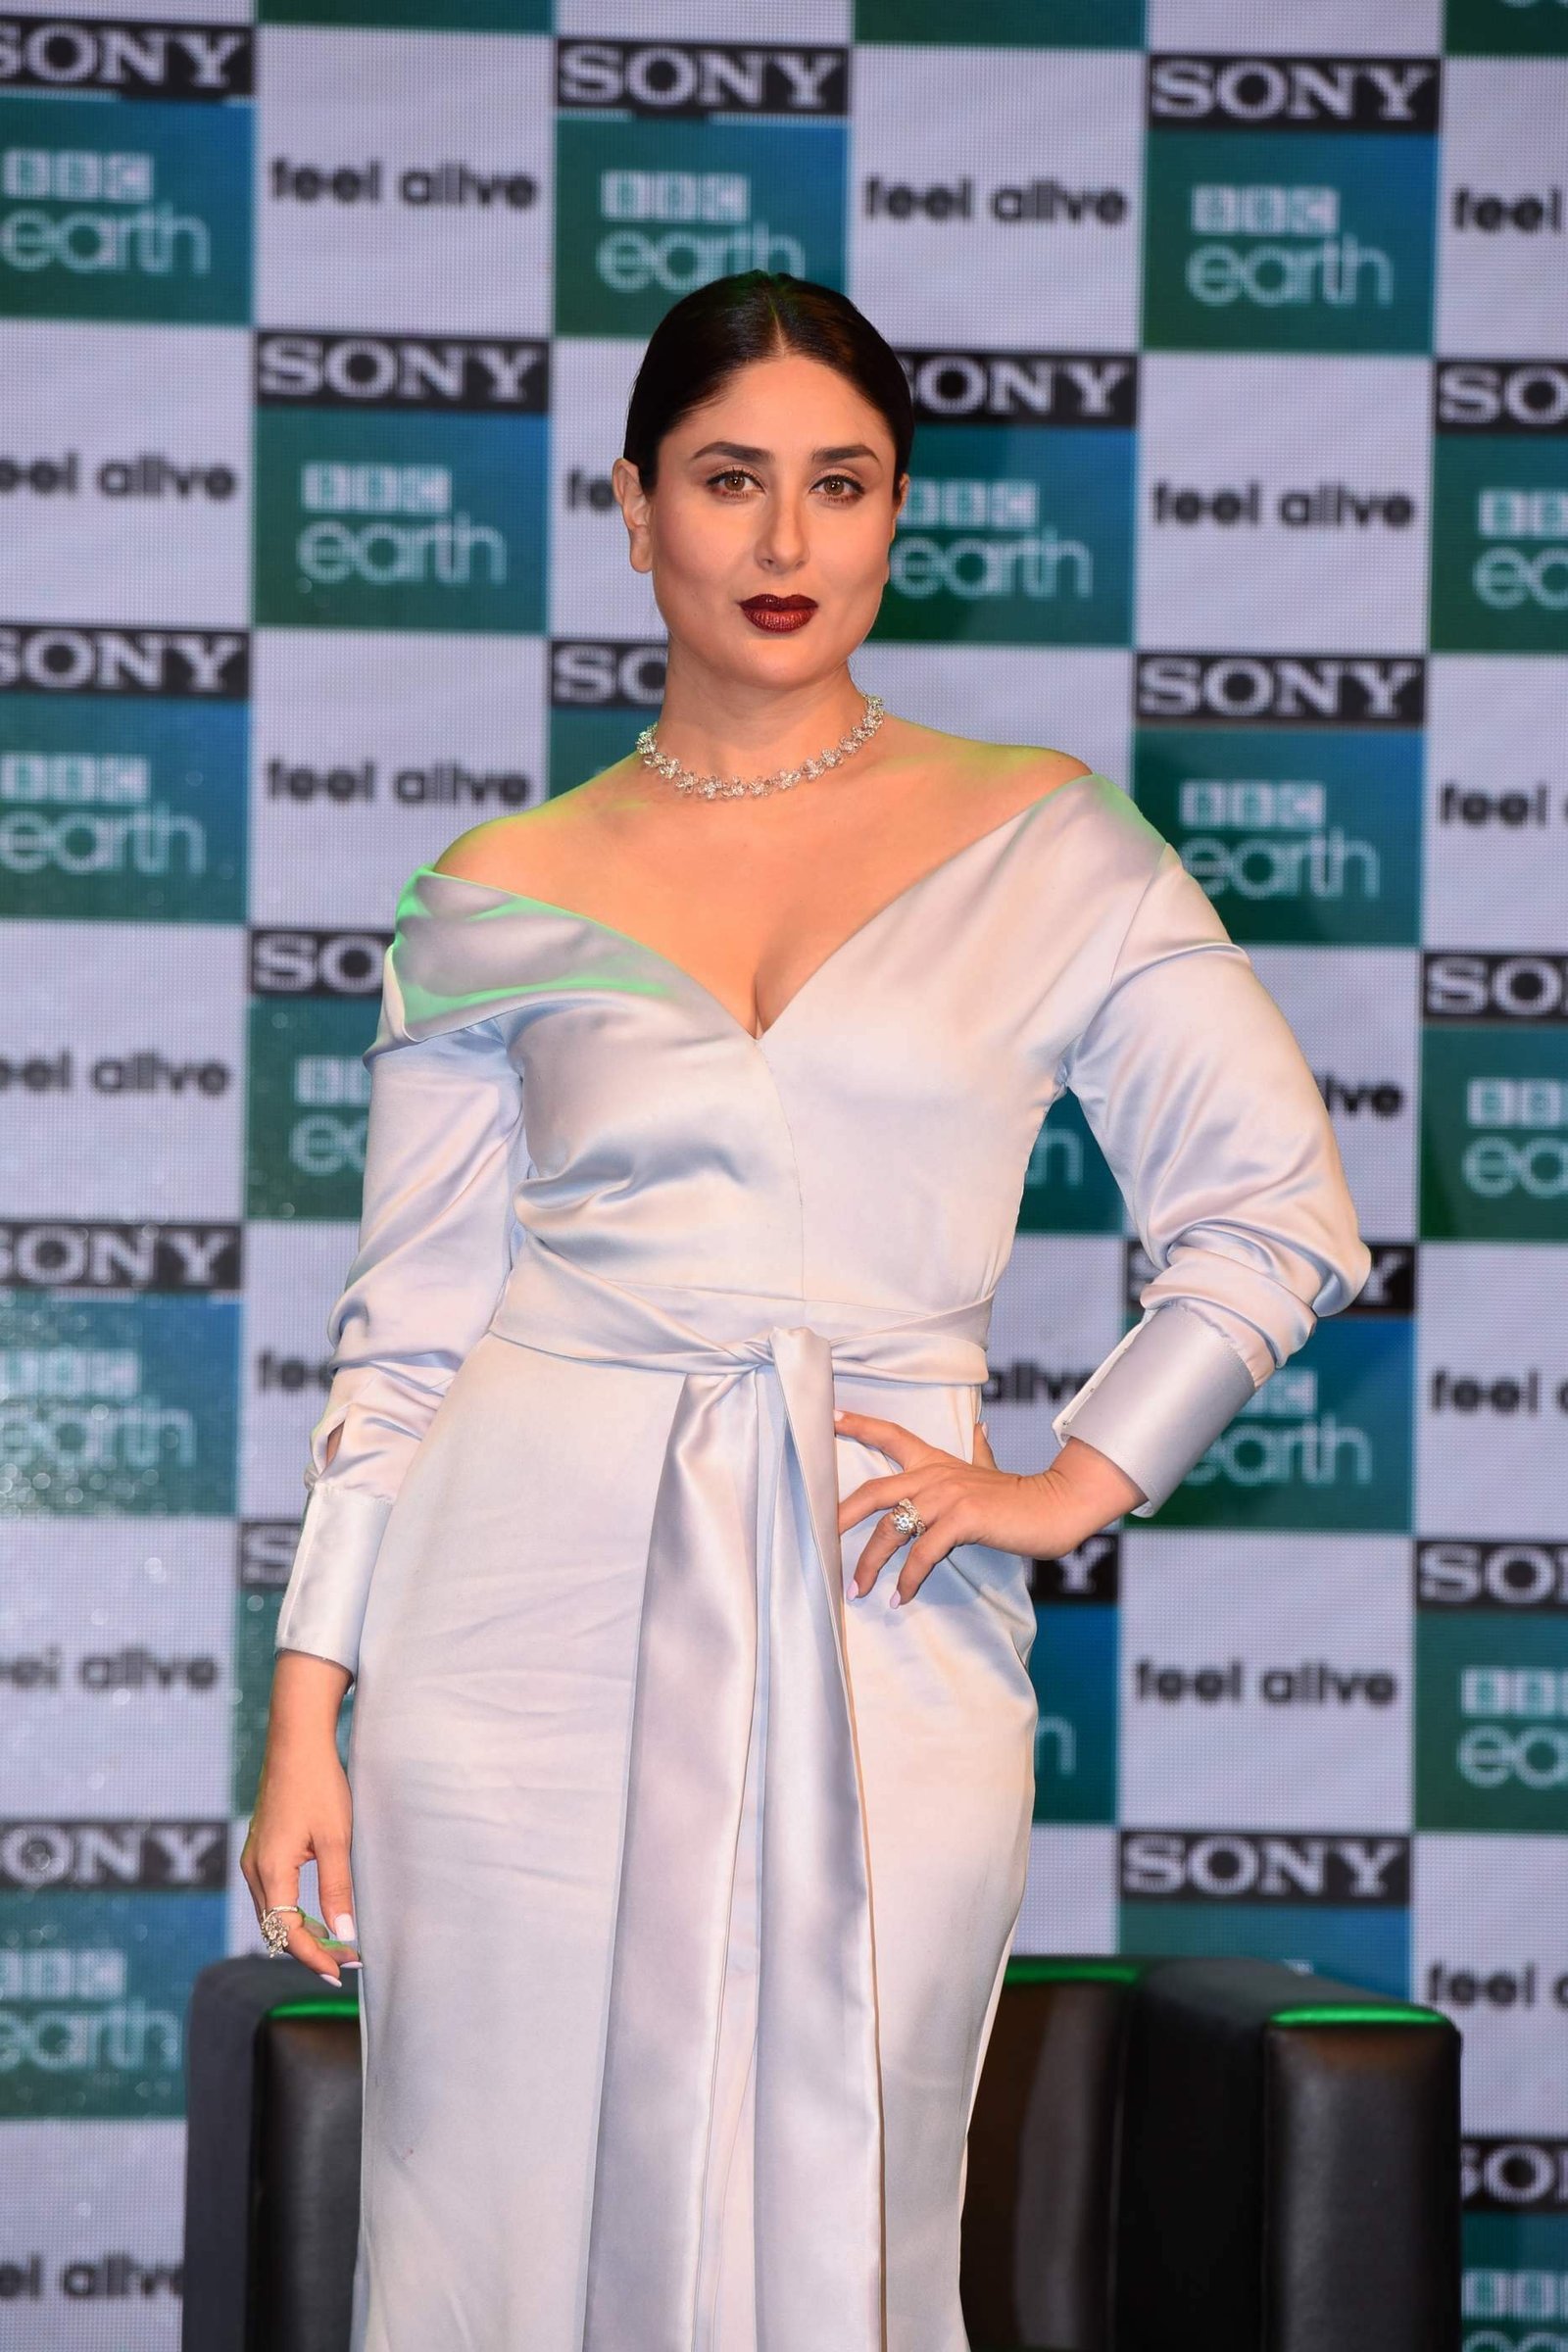 Kareena Kapoor Khan during the launch of a new channel Sony BBC Earth Images | Picture 1477744